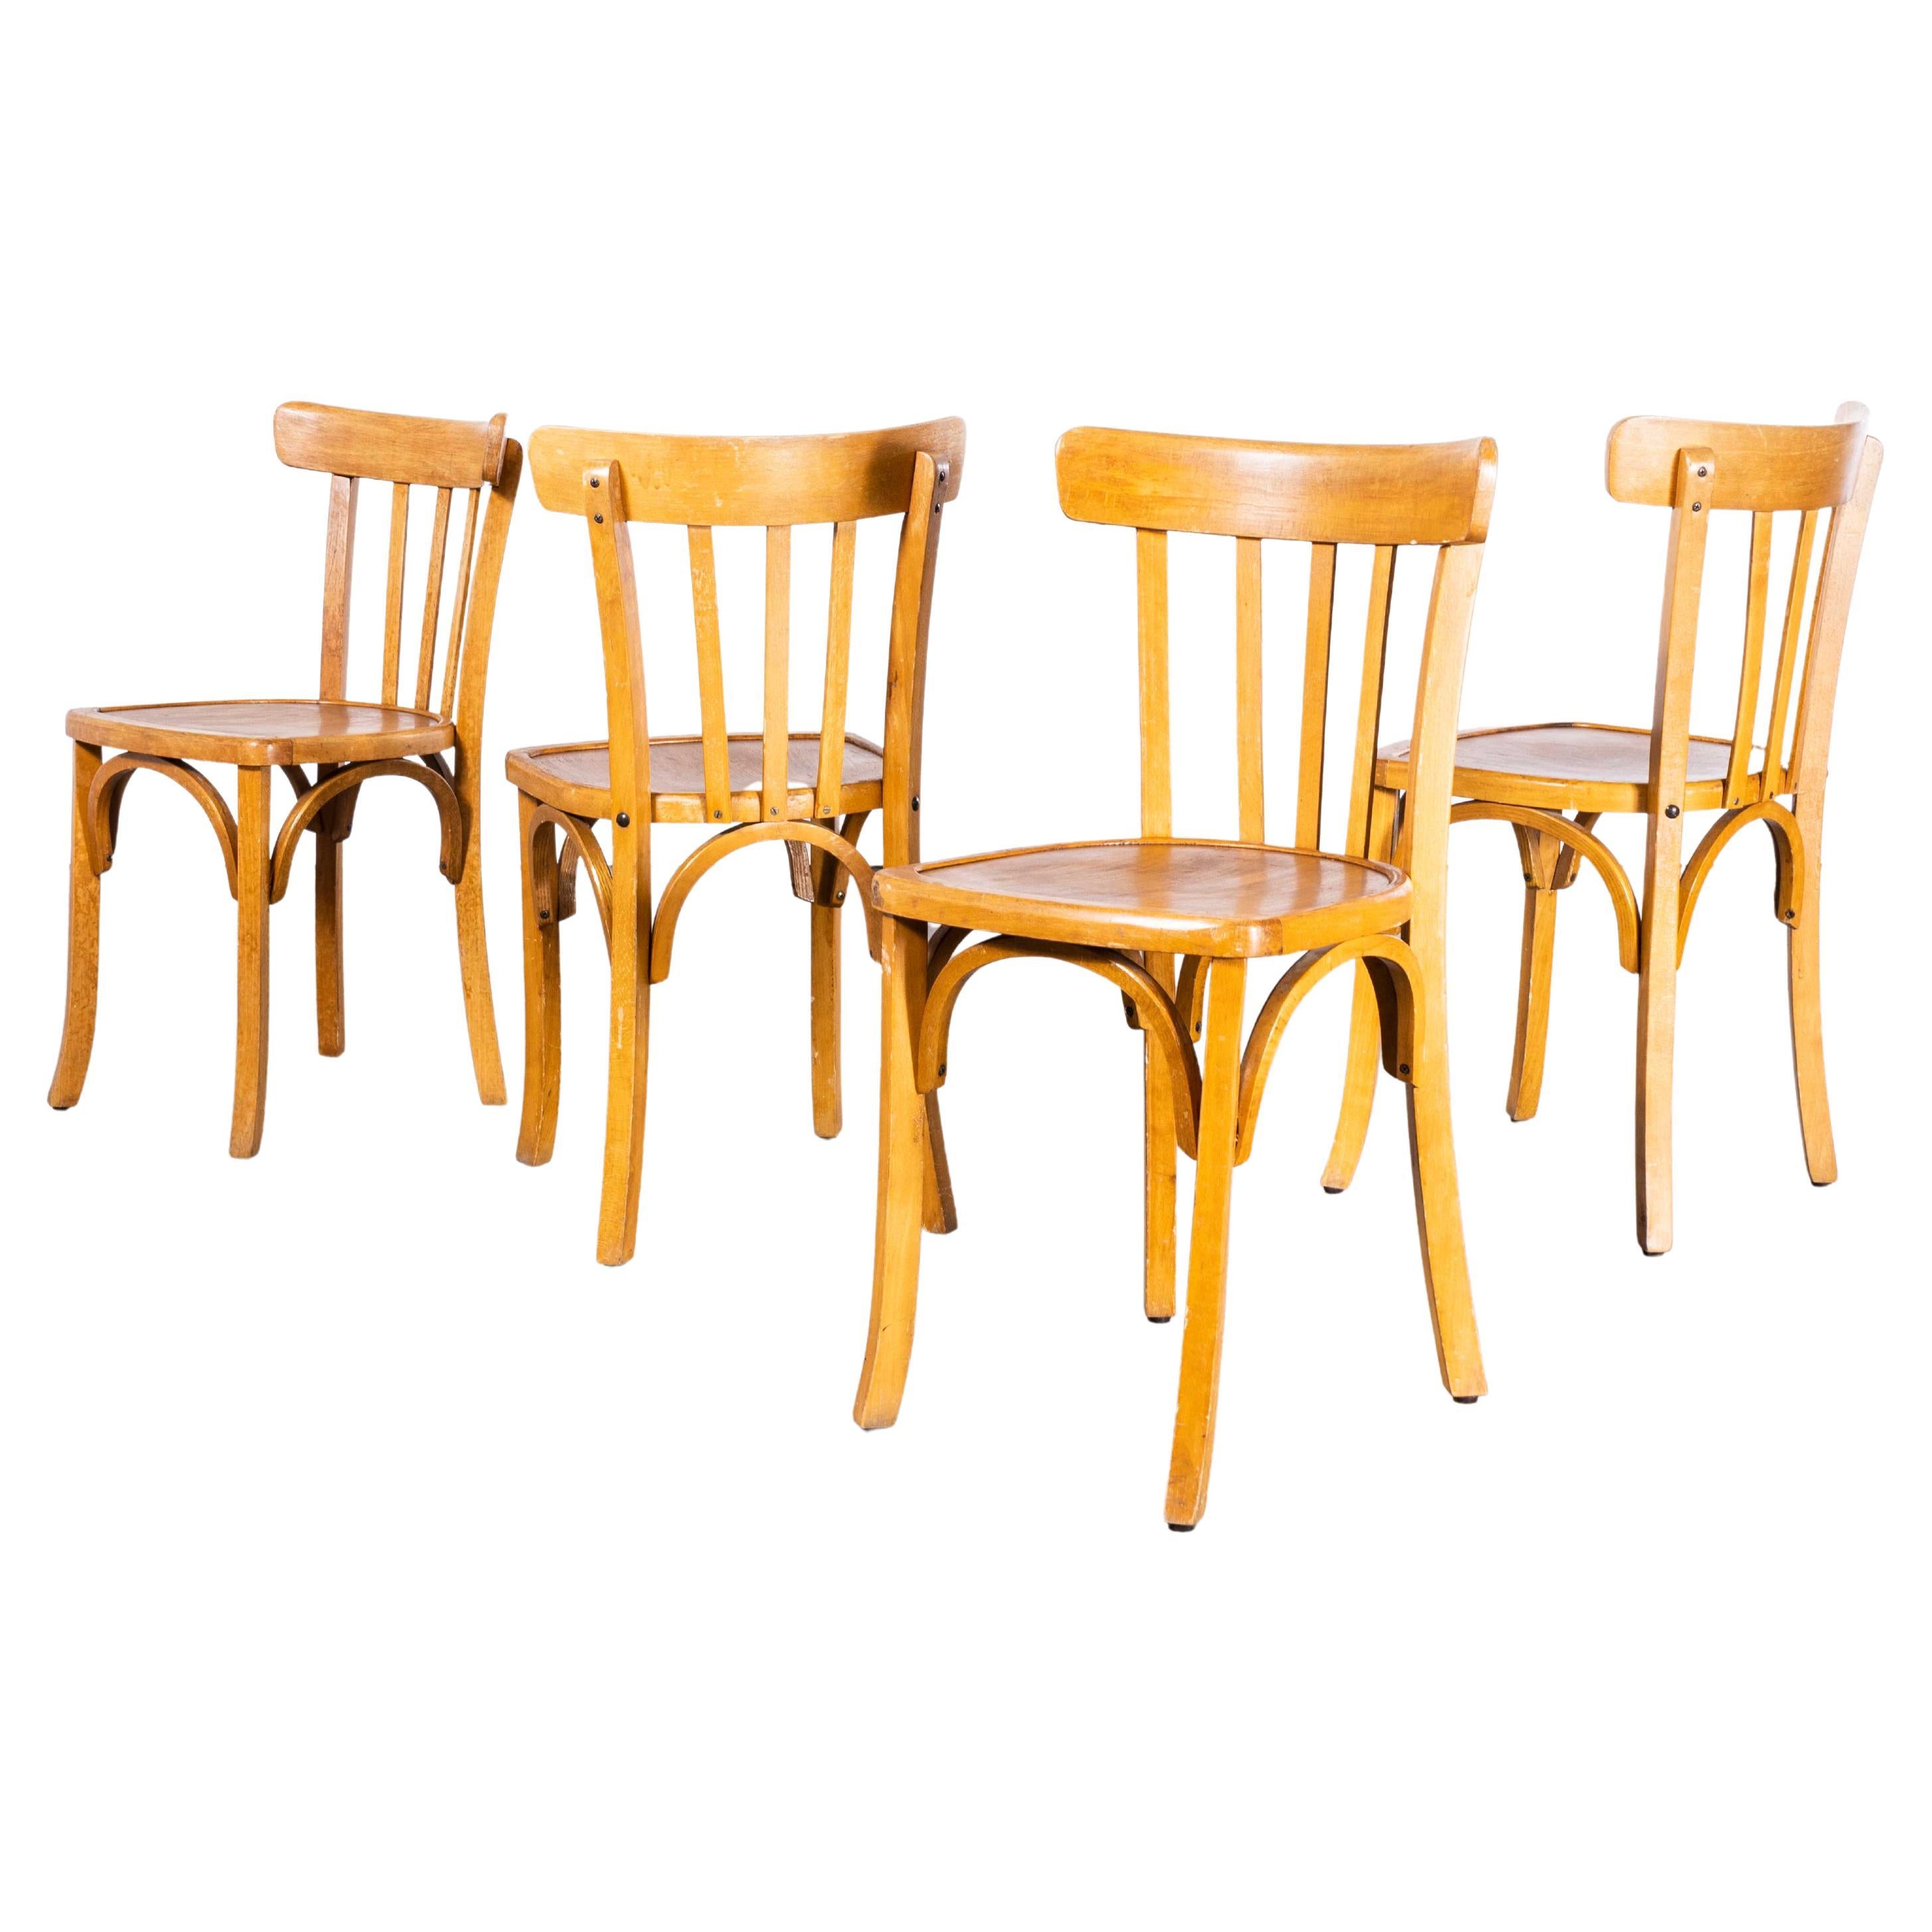 1950s Luterma Honey Oak Bentwood Dining Chair - Set of Four For Sale